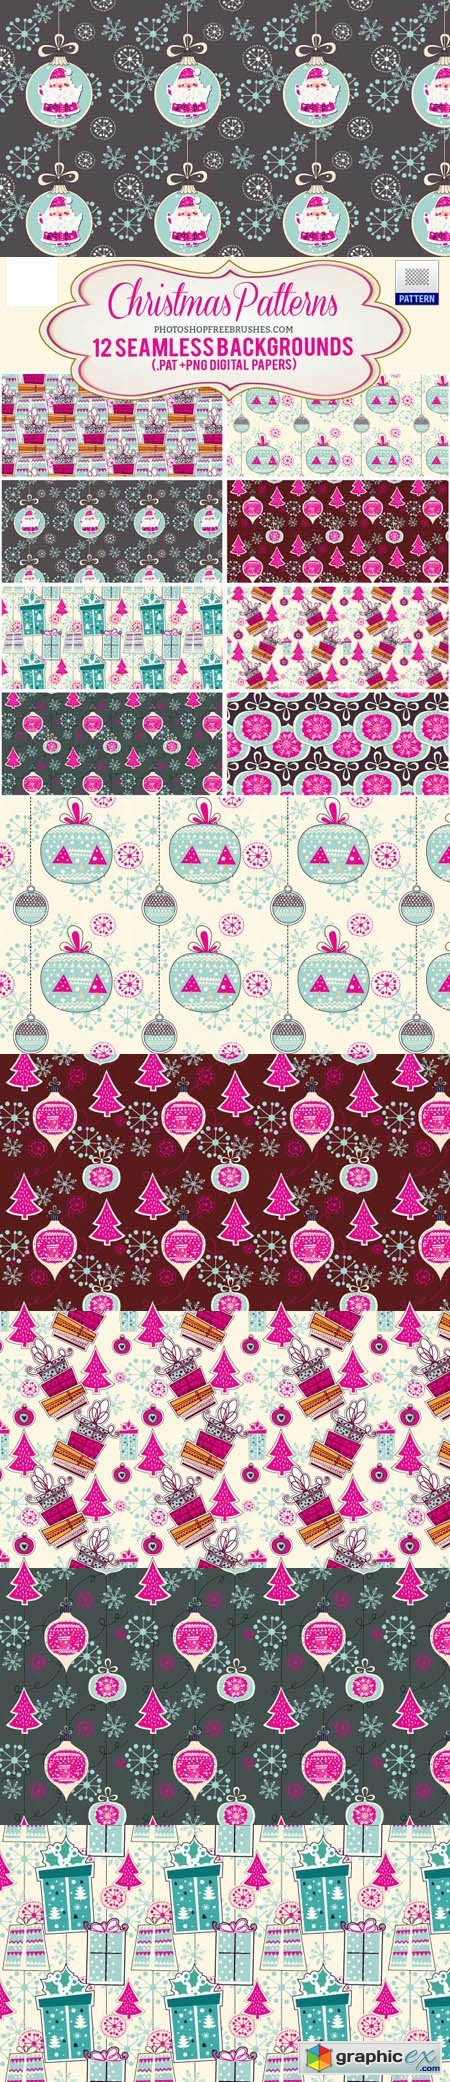 12 Pink Christmas Holiday Photoshop Patterns and Backgrounds